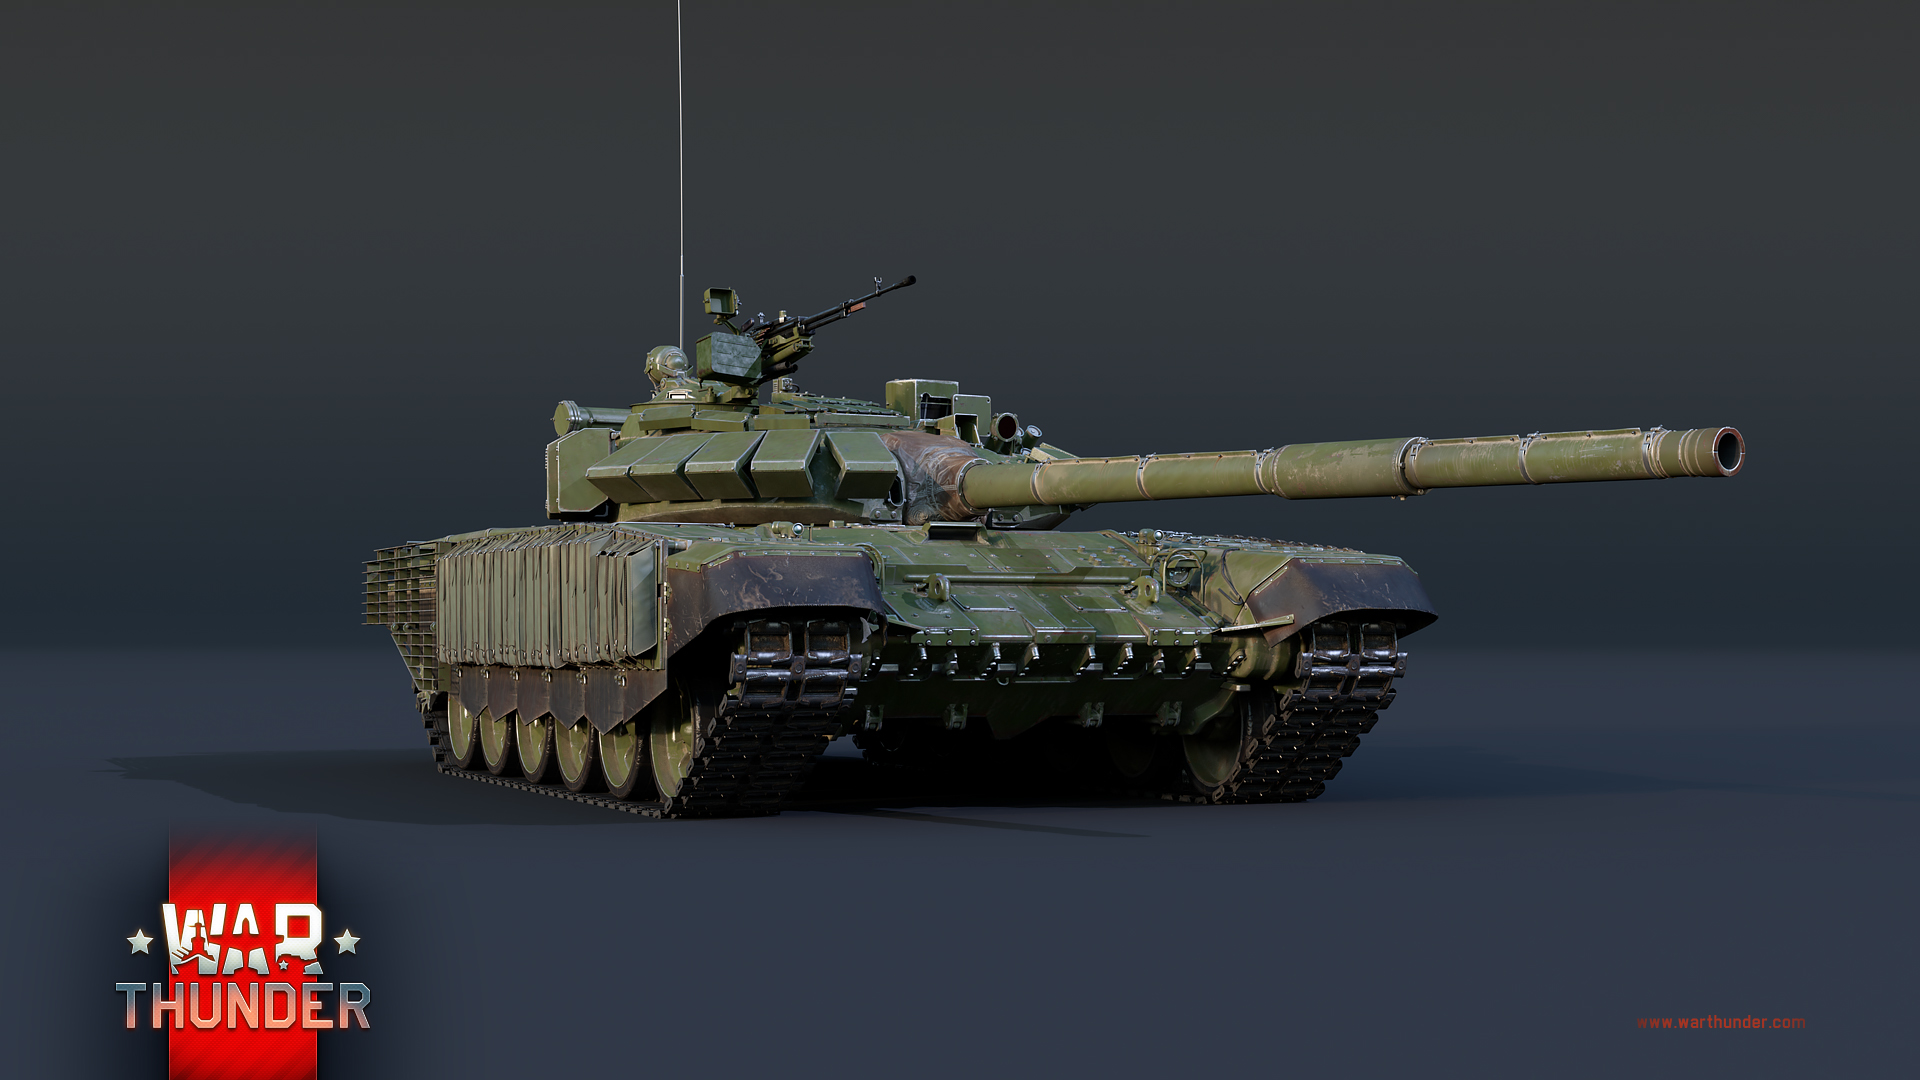 Development New T 72 Modifications: Here Come The Top Of The Line Russians!